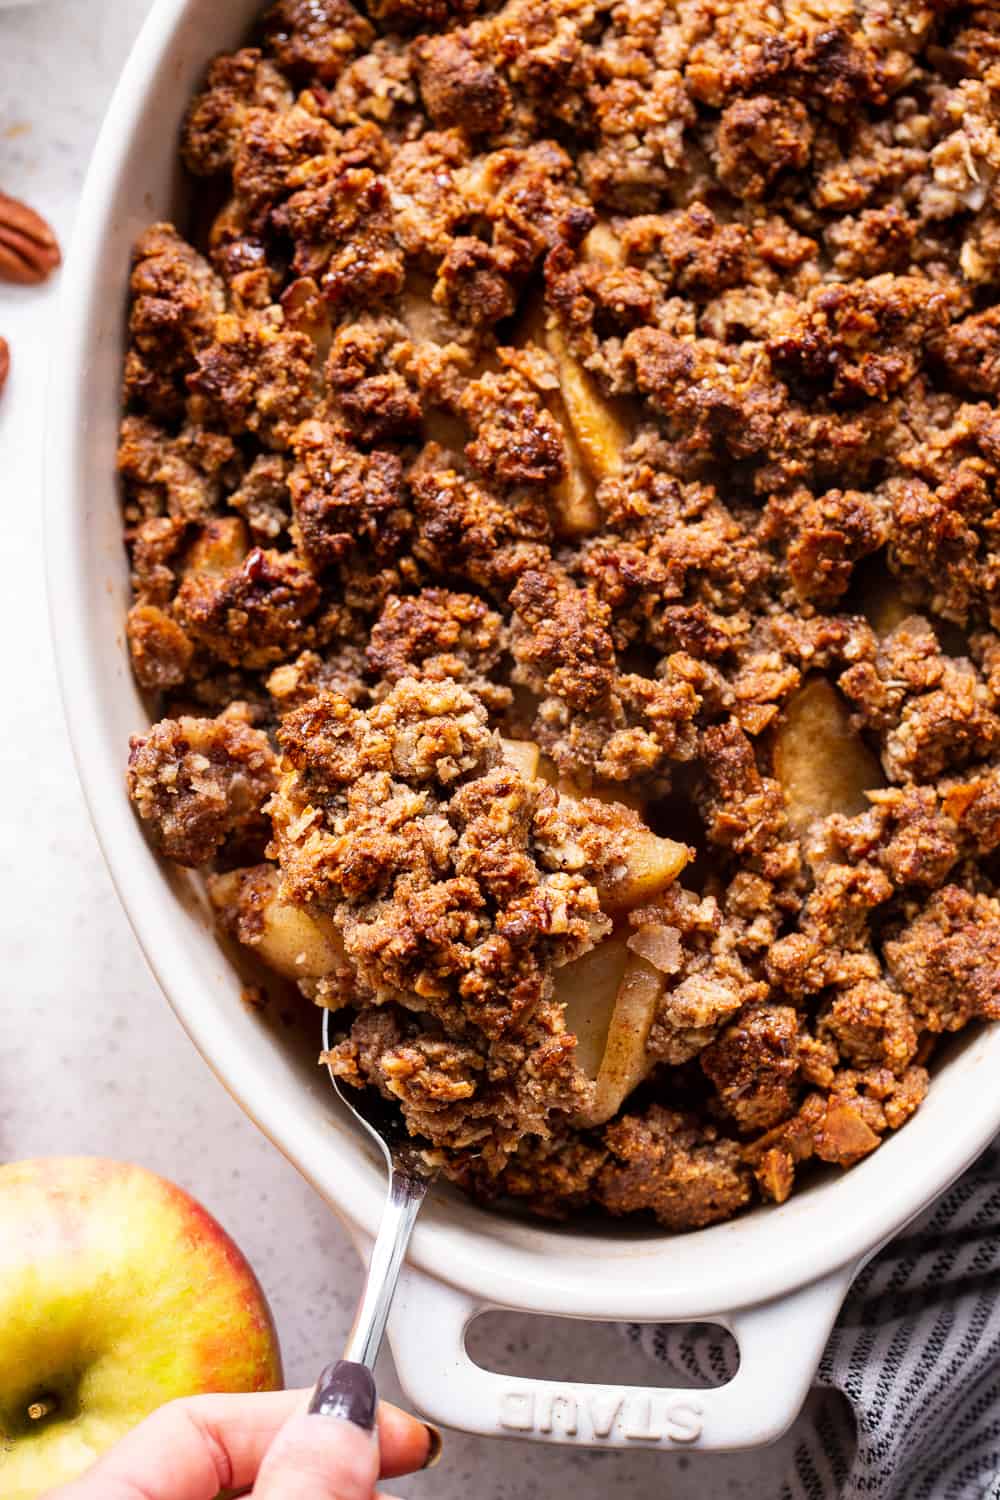 A healthy version of a classic fall dessert, this Paleo Maple Pecan Apple Crisp is the perfect warm and sweet comfort food on cozy nights.  It's grain free, gluten free, paleo, vegan, and soy free with simple whole ingredients and the fall flavors you crave. #paleo #vegan #cleaneating #applecrisp #healthybaking